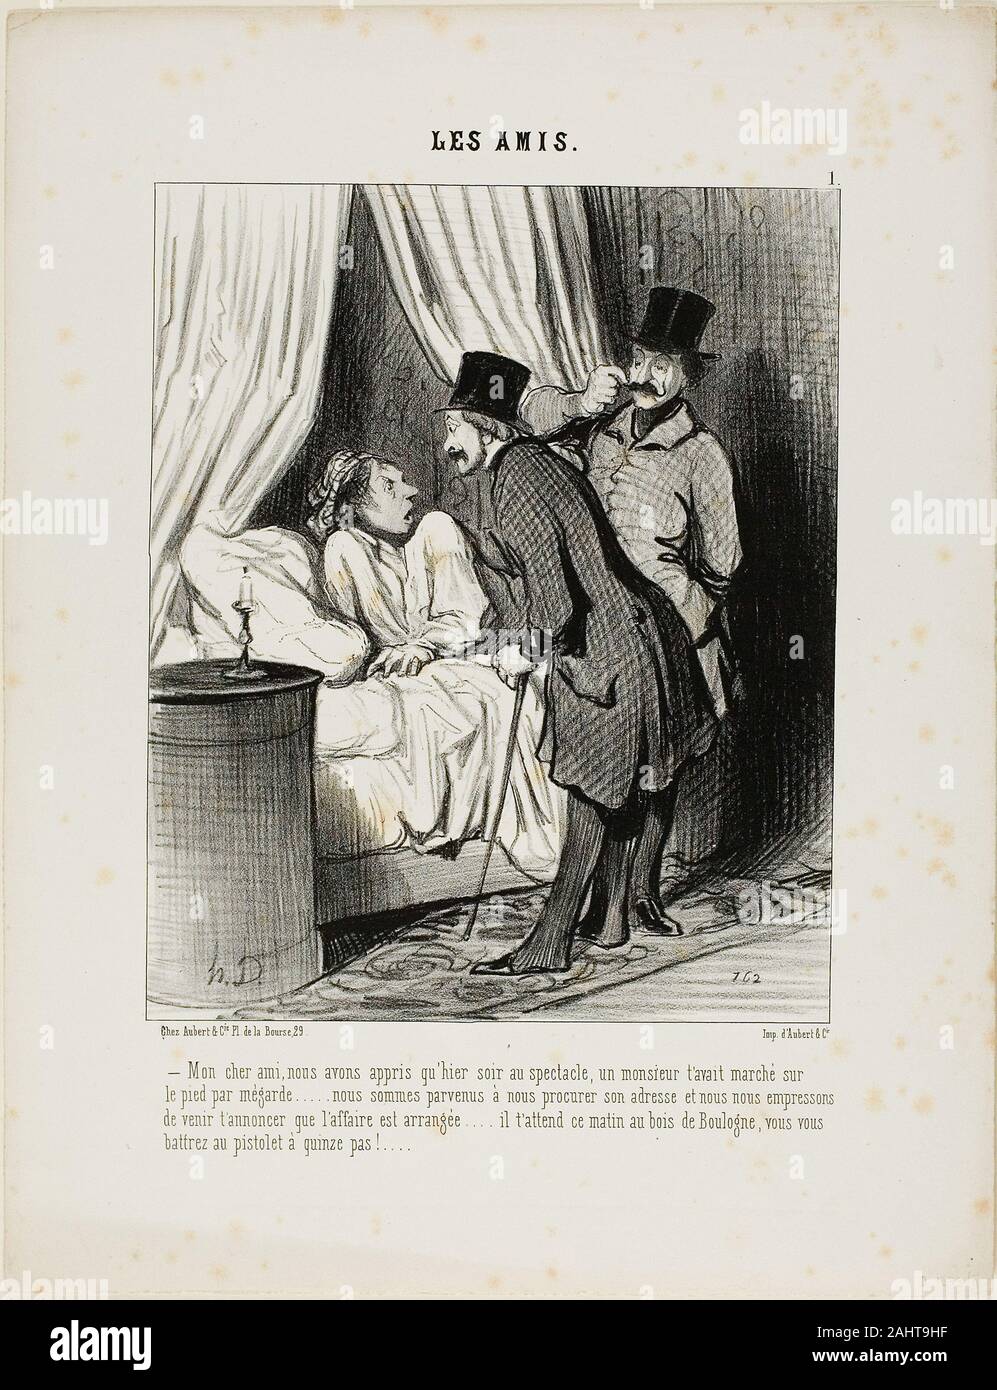 Honoré-Victorin Daumier. “- My dear friend, we have learned yesterday at the theatre that a gentleman has inadvertedly stepped on your foot.... We have come to get his address and we are eager to announce that the affair is arranged.... He is waiting for you this morning in the Bois de Boulogne. You will raise pistols at a distance of 15 paces,” plate 1 from Les Amis. 1845. France. Lithograph in black on ivory wove paper Stock Photo